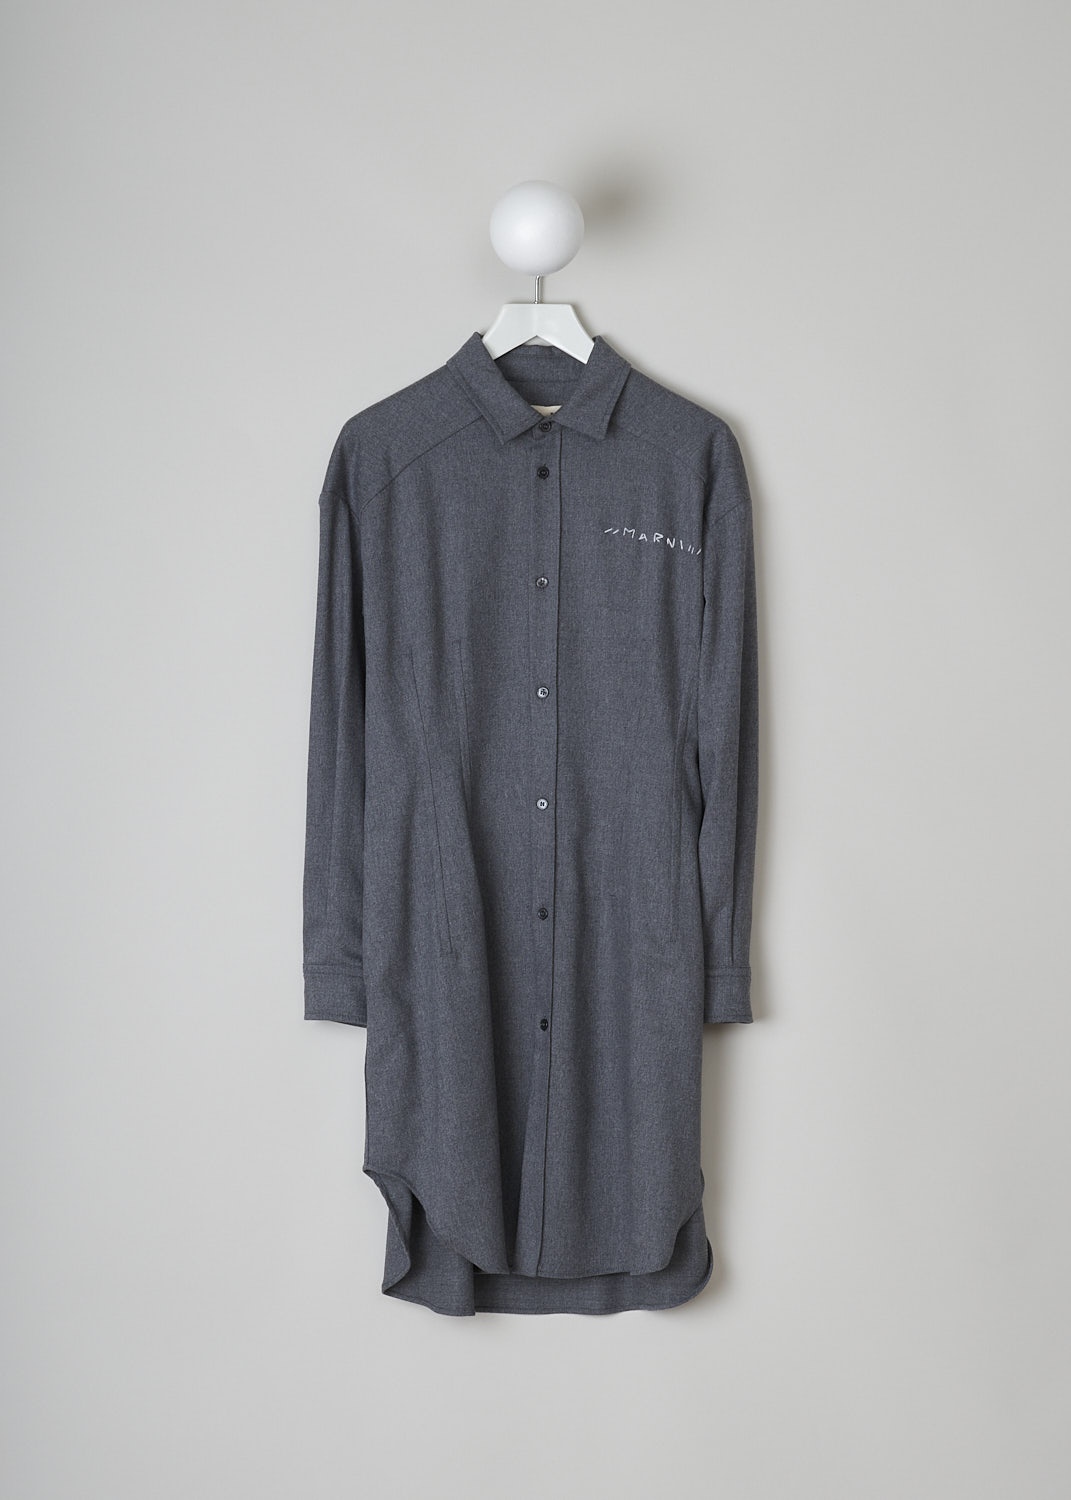 MARNI, FLANNEL GREY SHIRT DRESS, ABMA0909S0_UTW970_00N80, Grey, Front, This grey flannel shirt dress has a classic collar and a button placket in the front. The long sleeves have buttoned cuffs. To one side on the chest, the brand's logo is stitched on in white. The dress is fitted with darts on the waist. Slant pockets are concealed in the side seams. The dress has a rounded hemline.  
